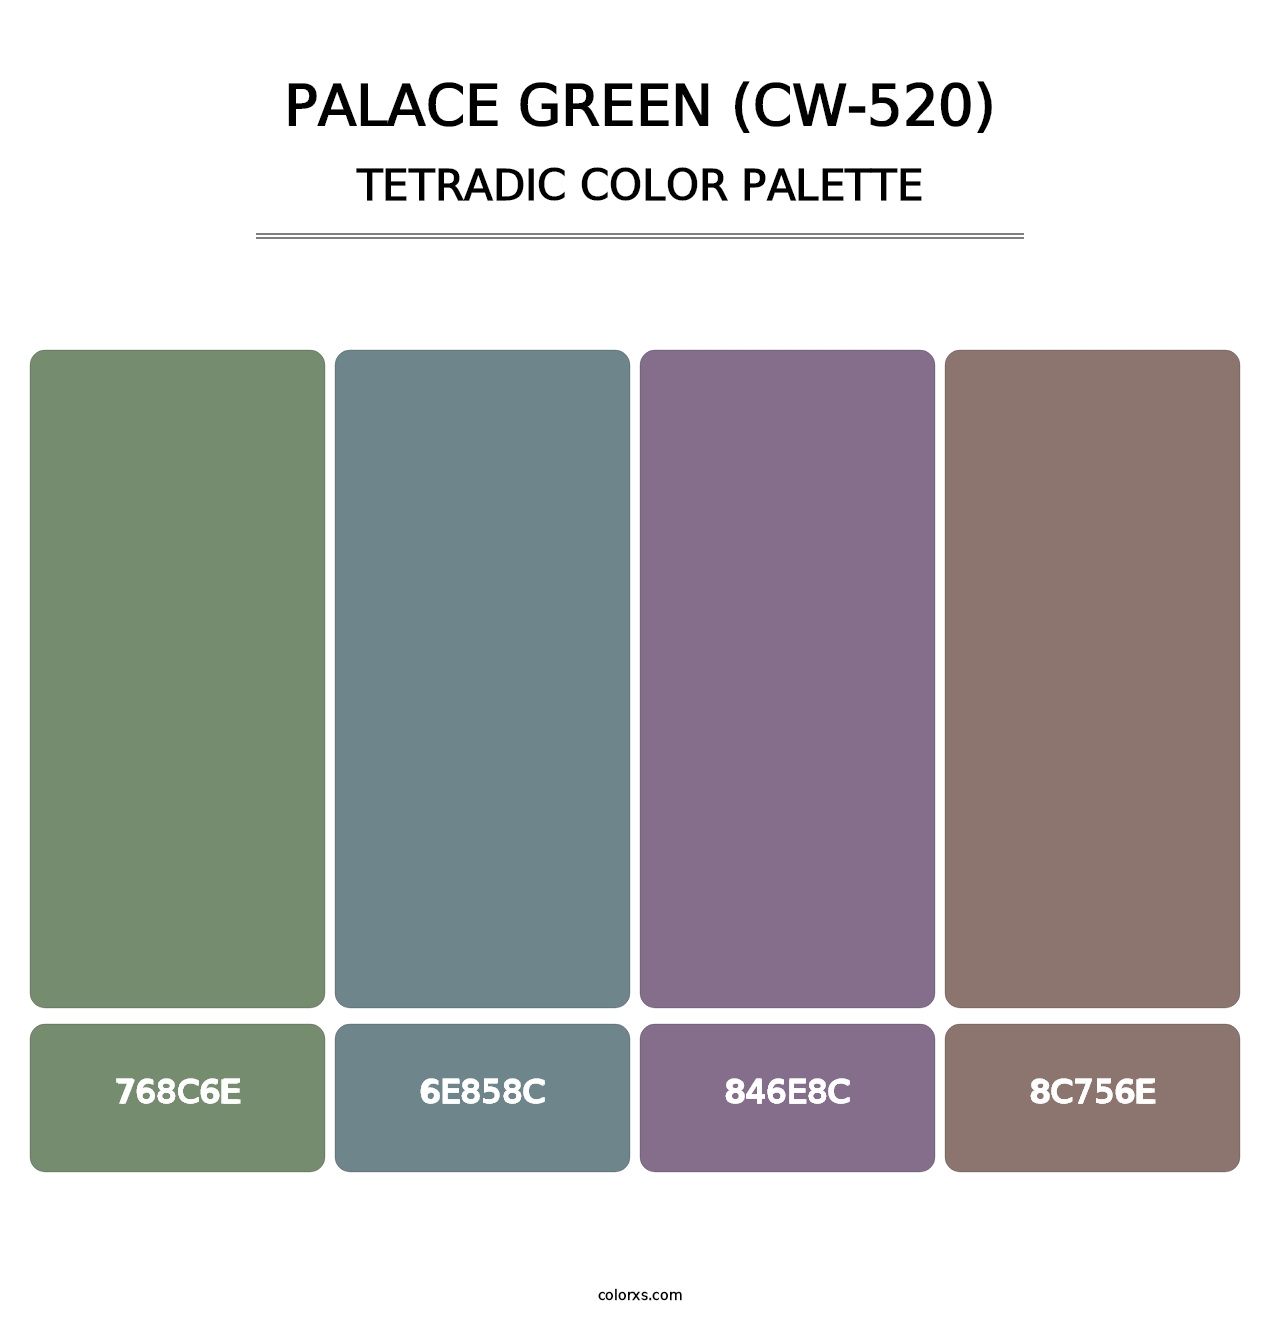 Palace Green (CW-520) - Tetradic Color Palette